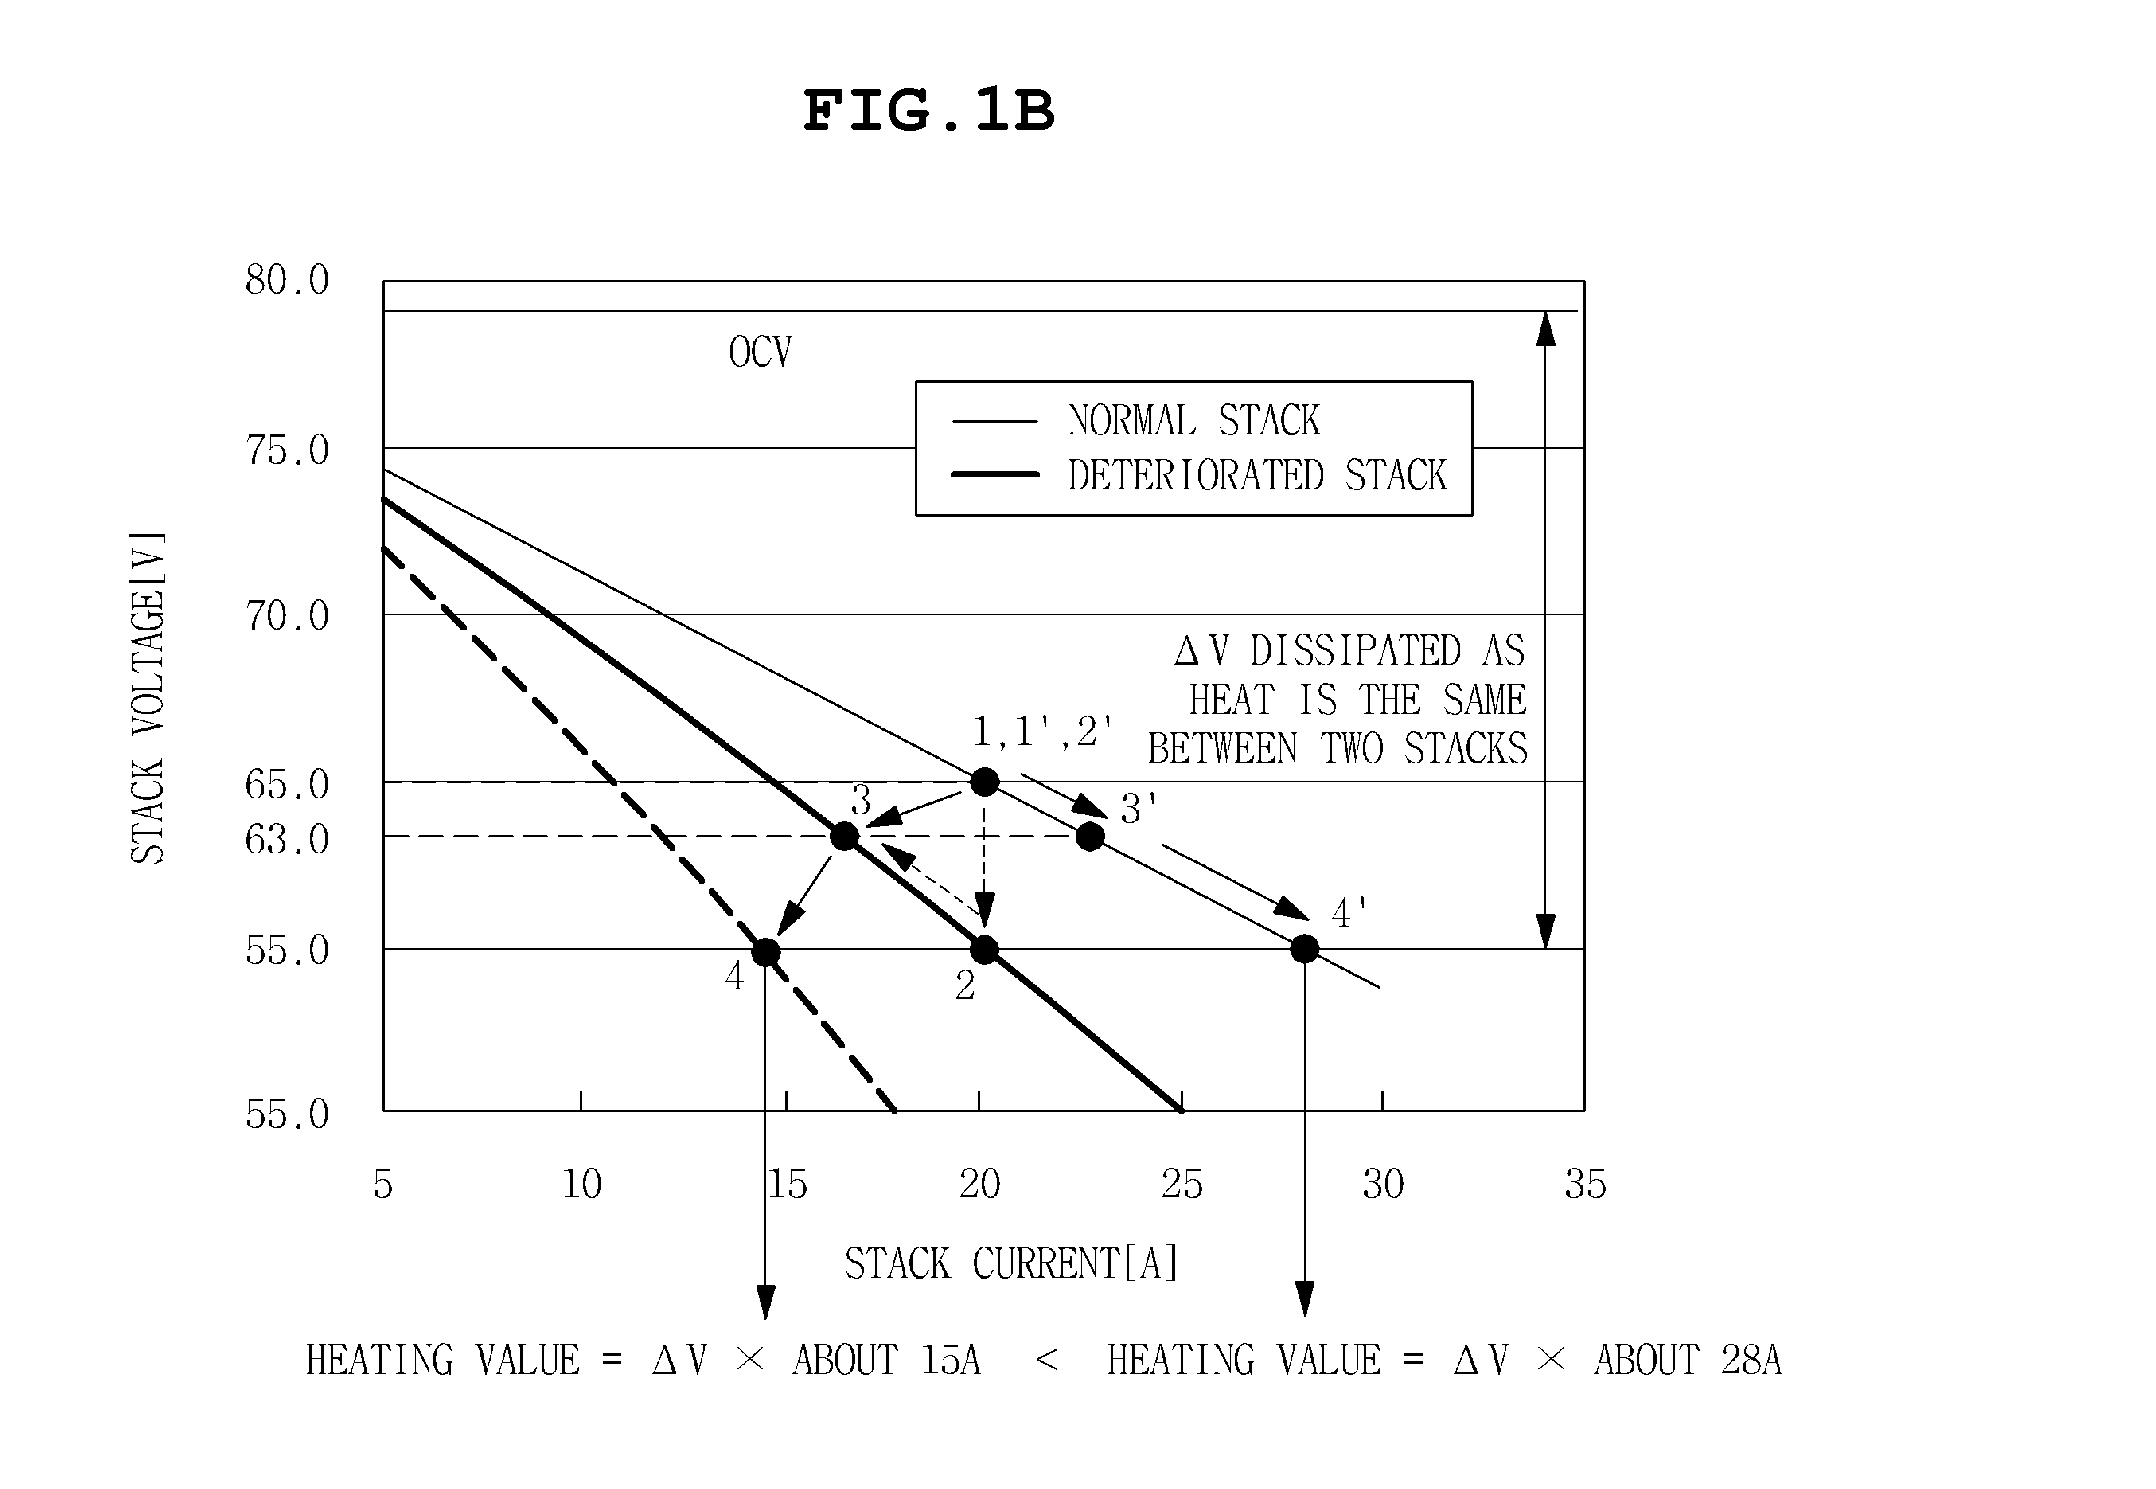 Apparatus for controlling fuel cell heating value